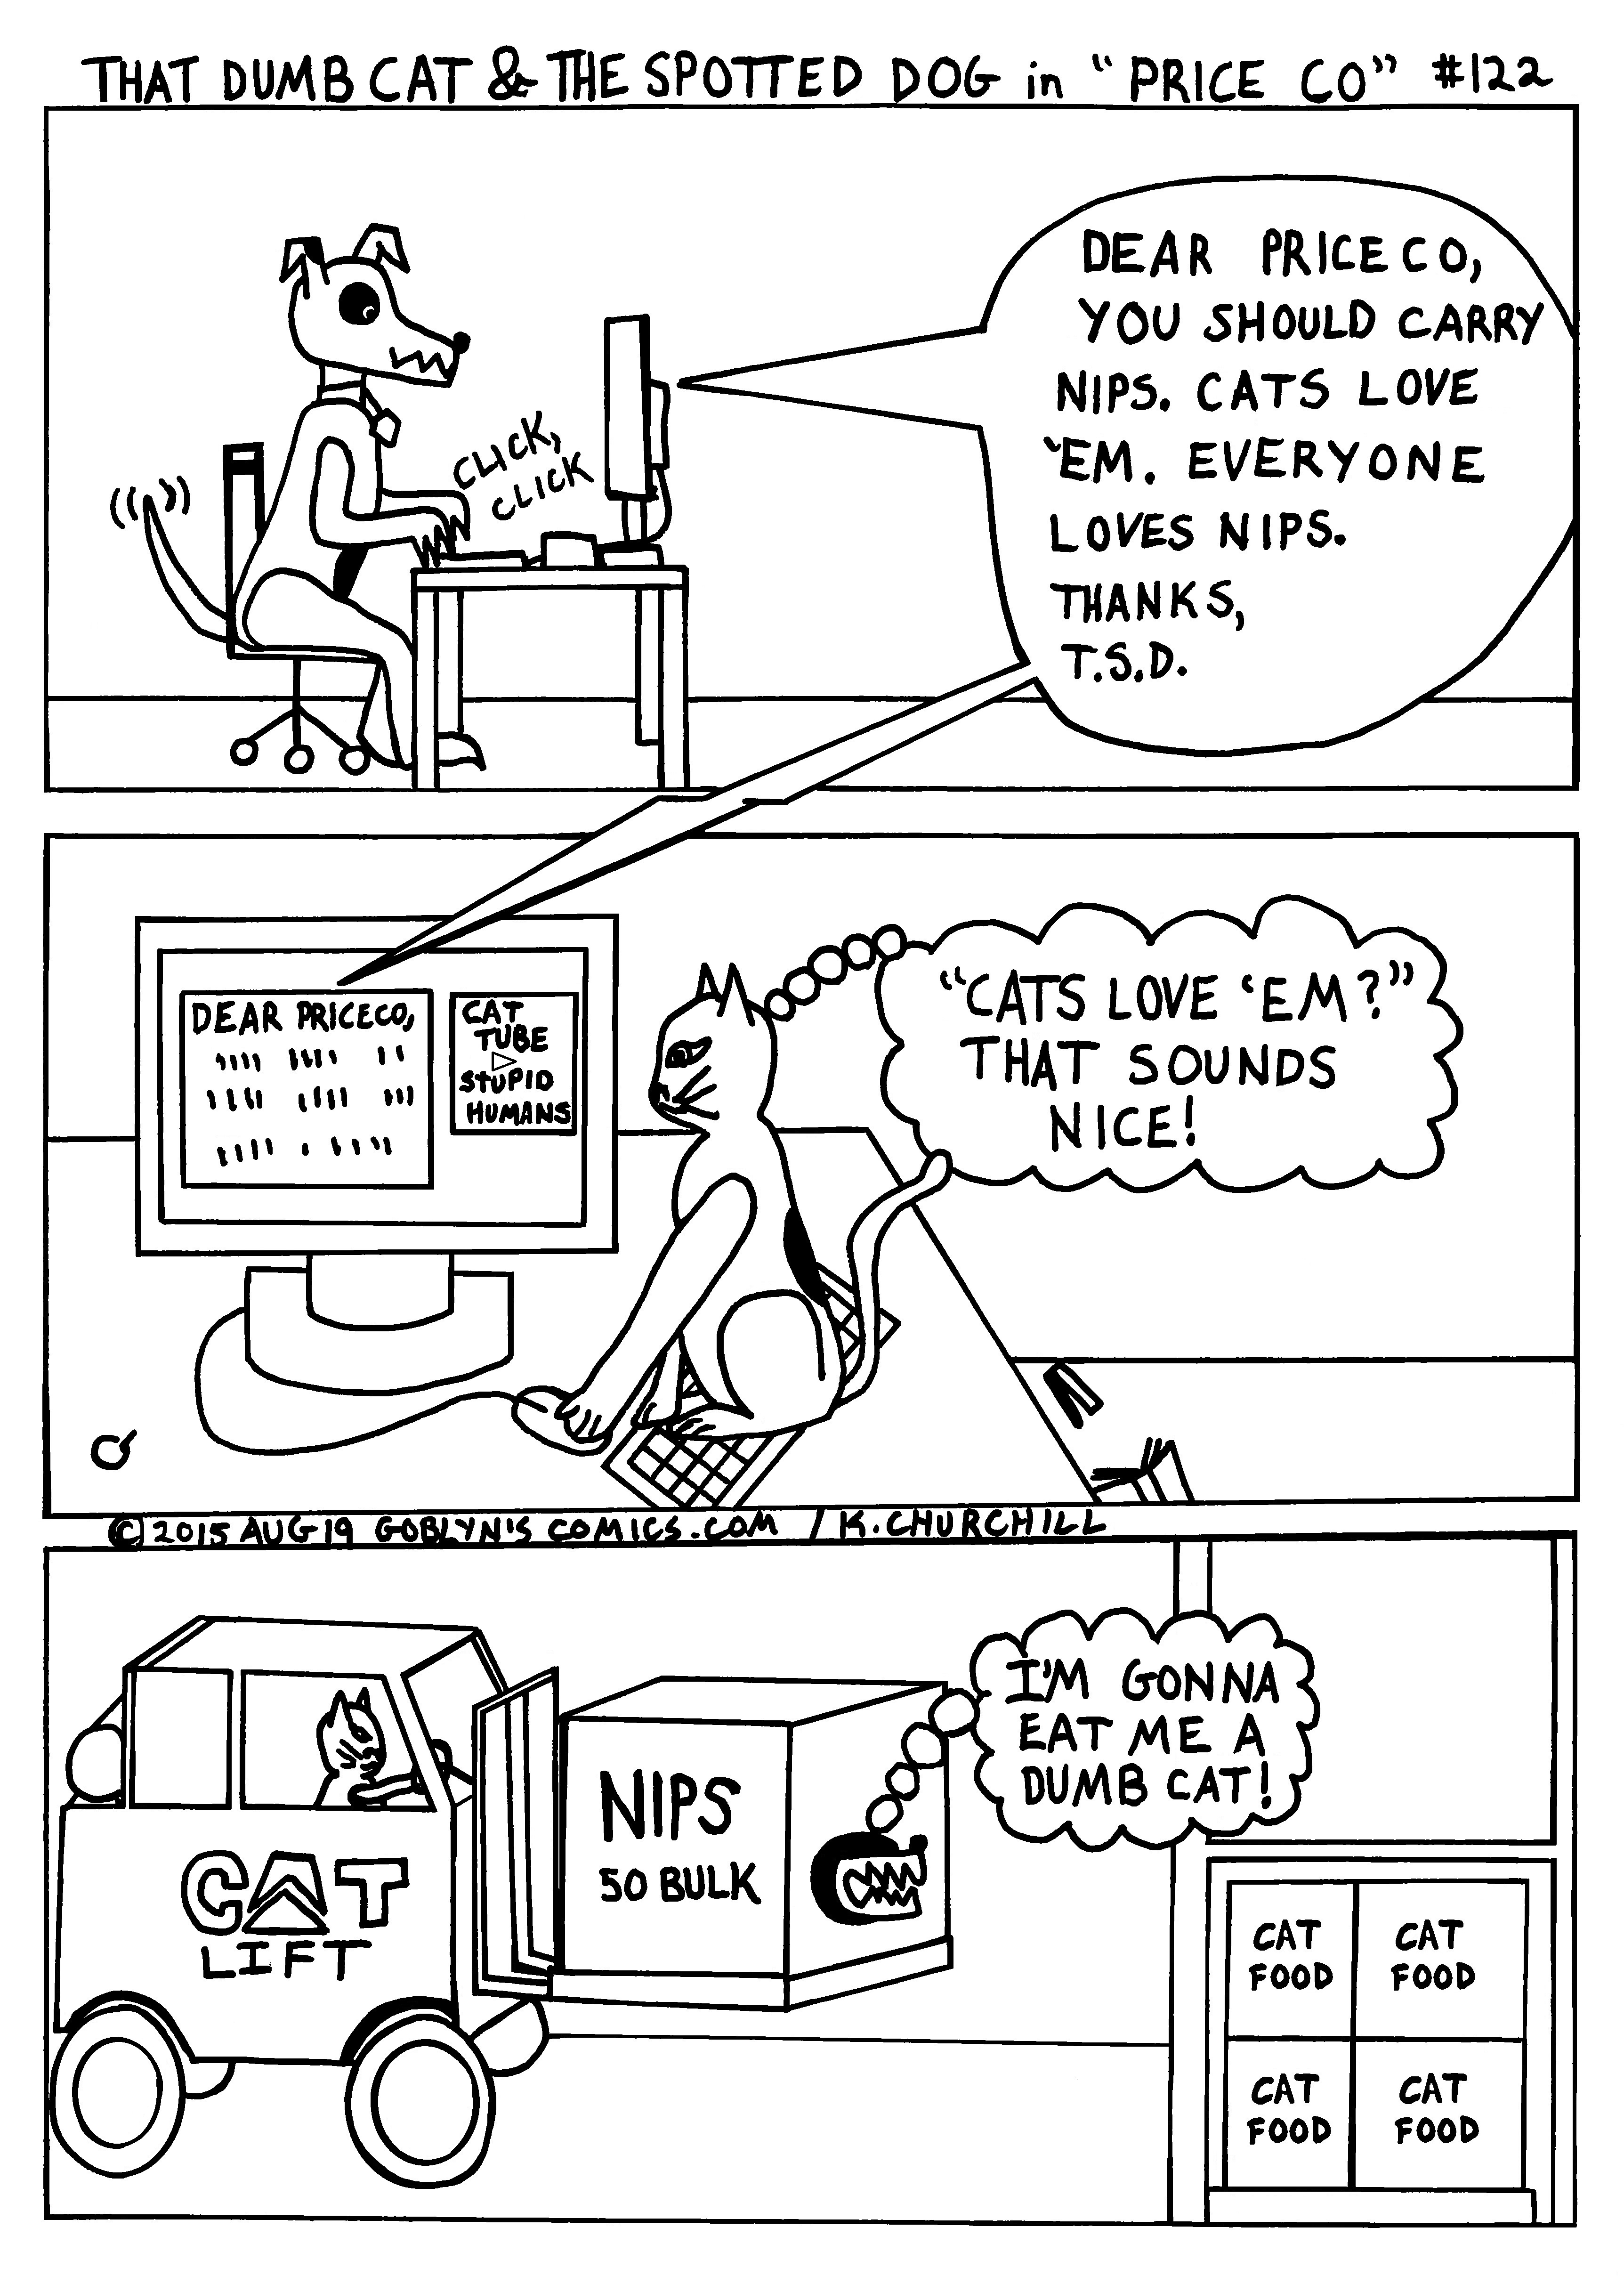 That Dumb Cat & The Spotted Dog in "Price Co"